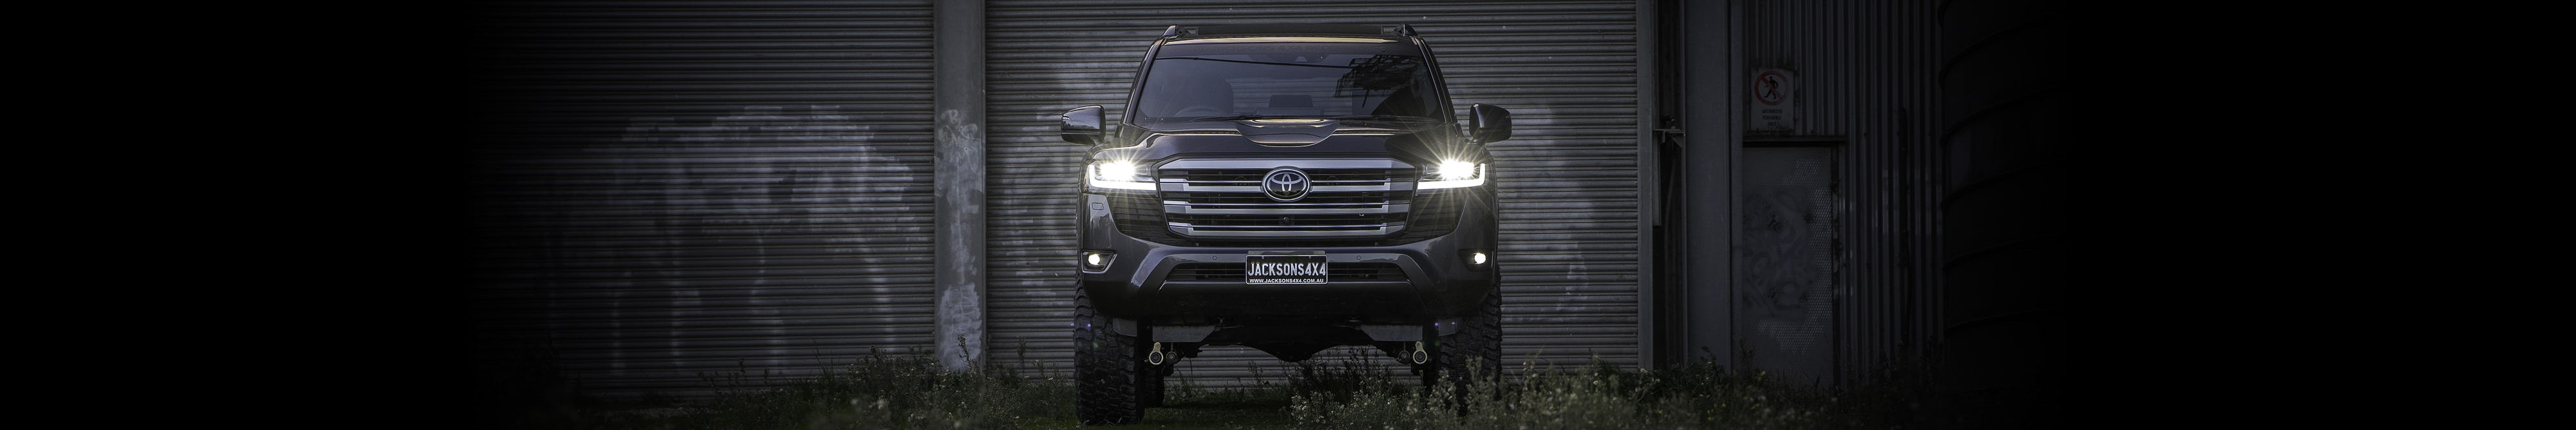 Front view of 300 Series Landcruiser with headlights on